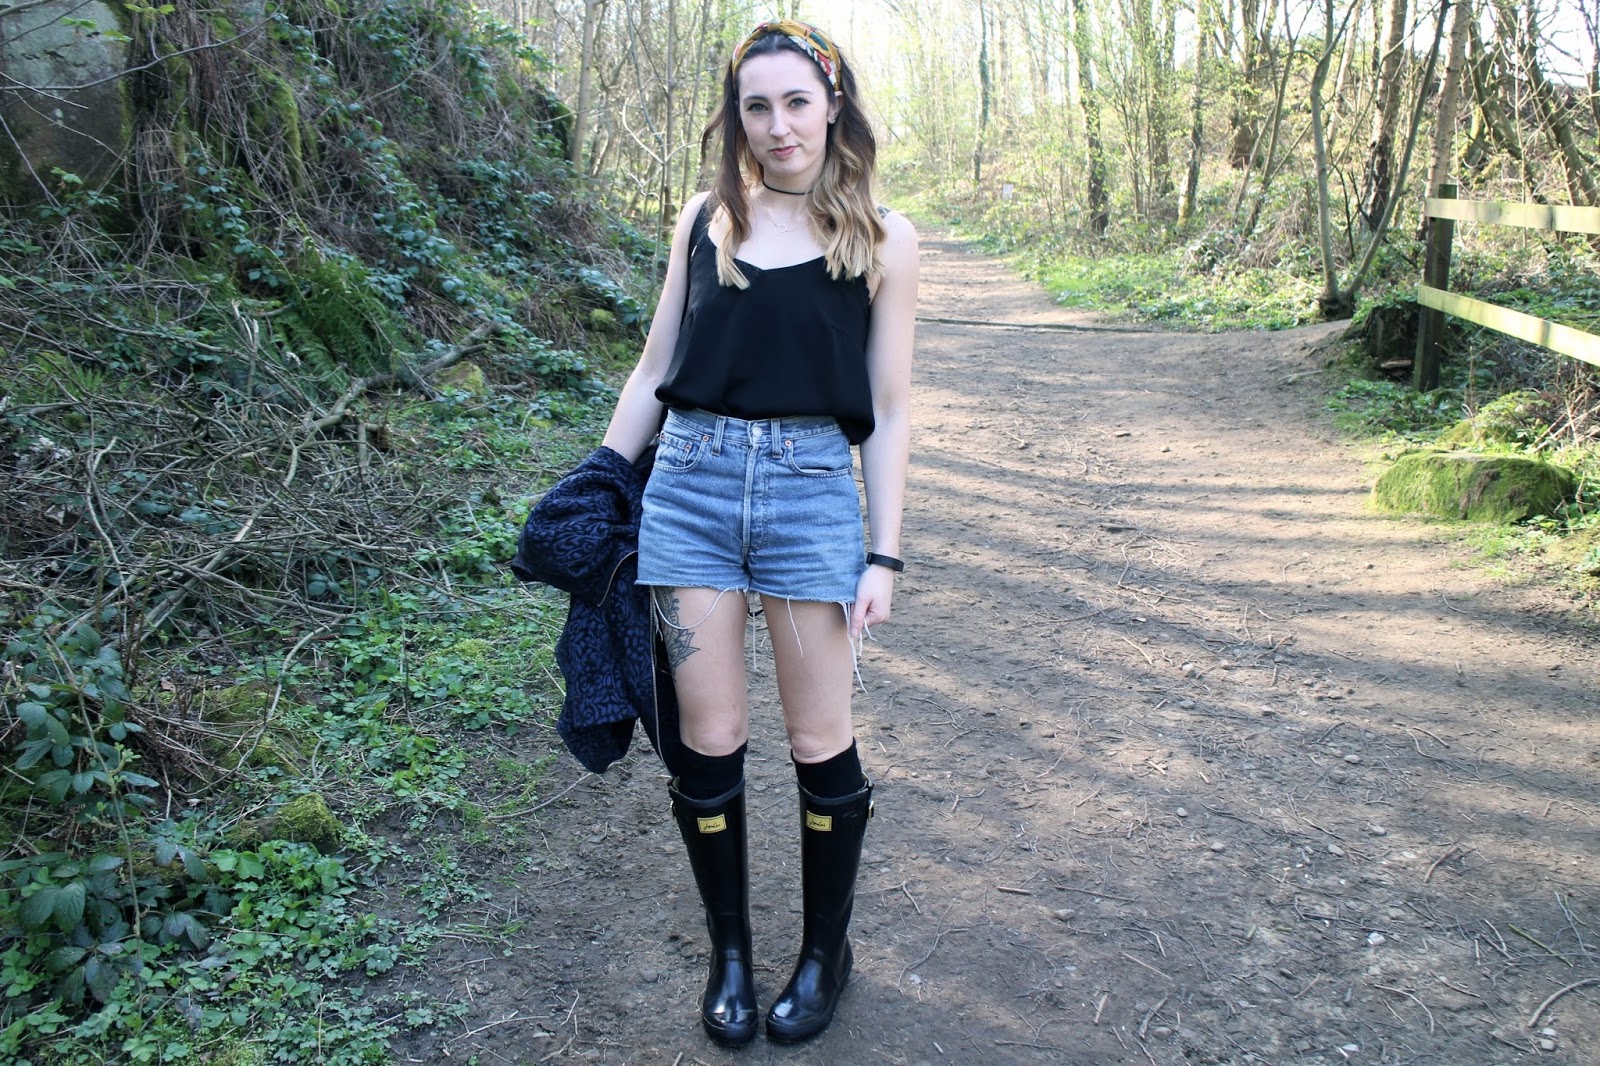 Festival fashion with vintage shorts, wellies and tattoos